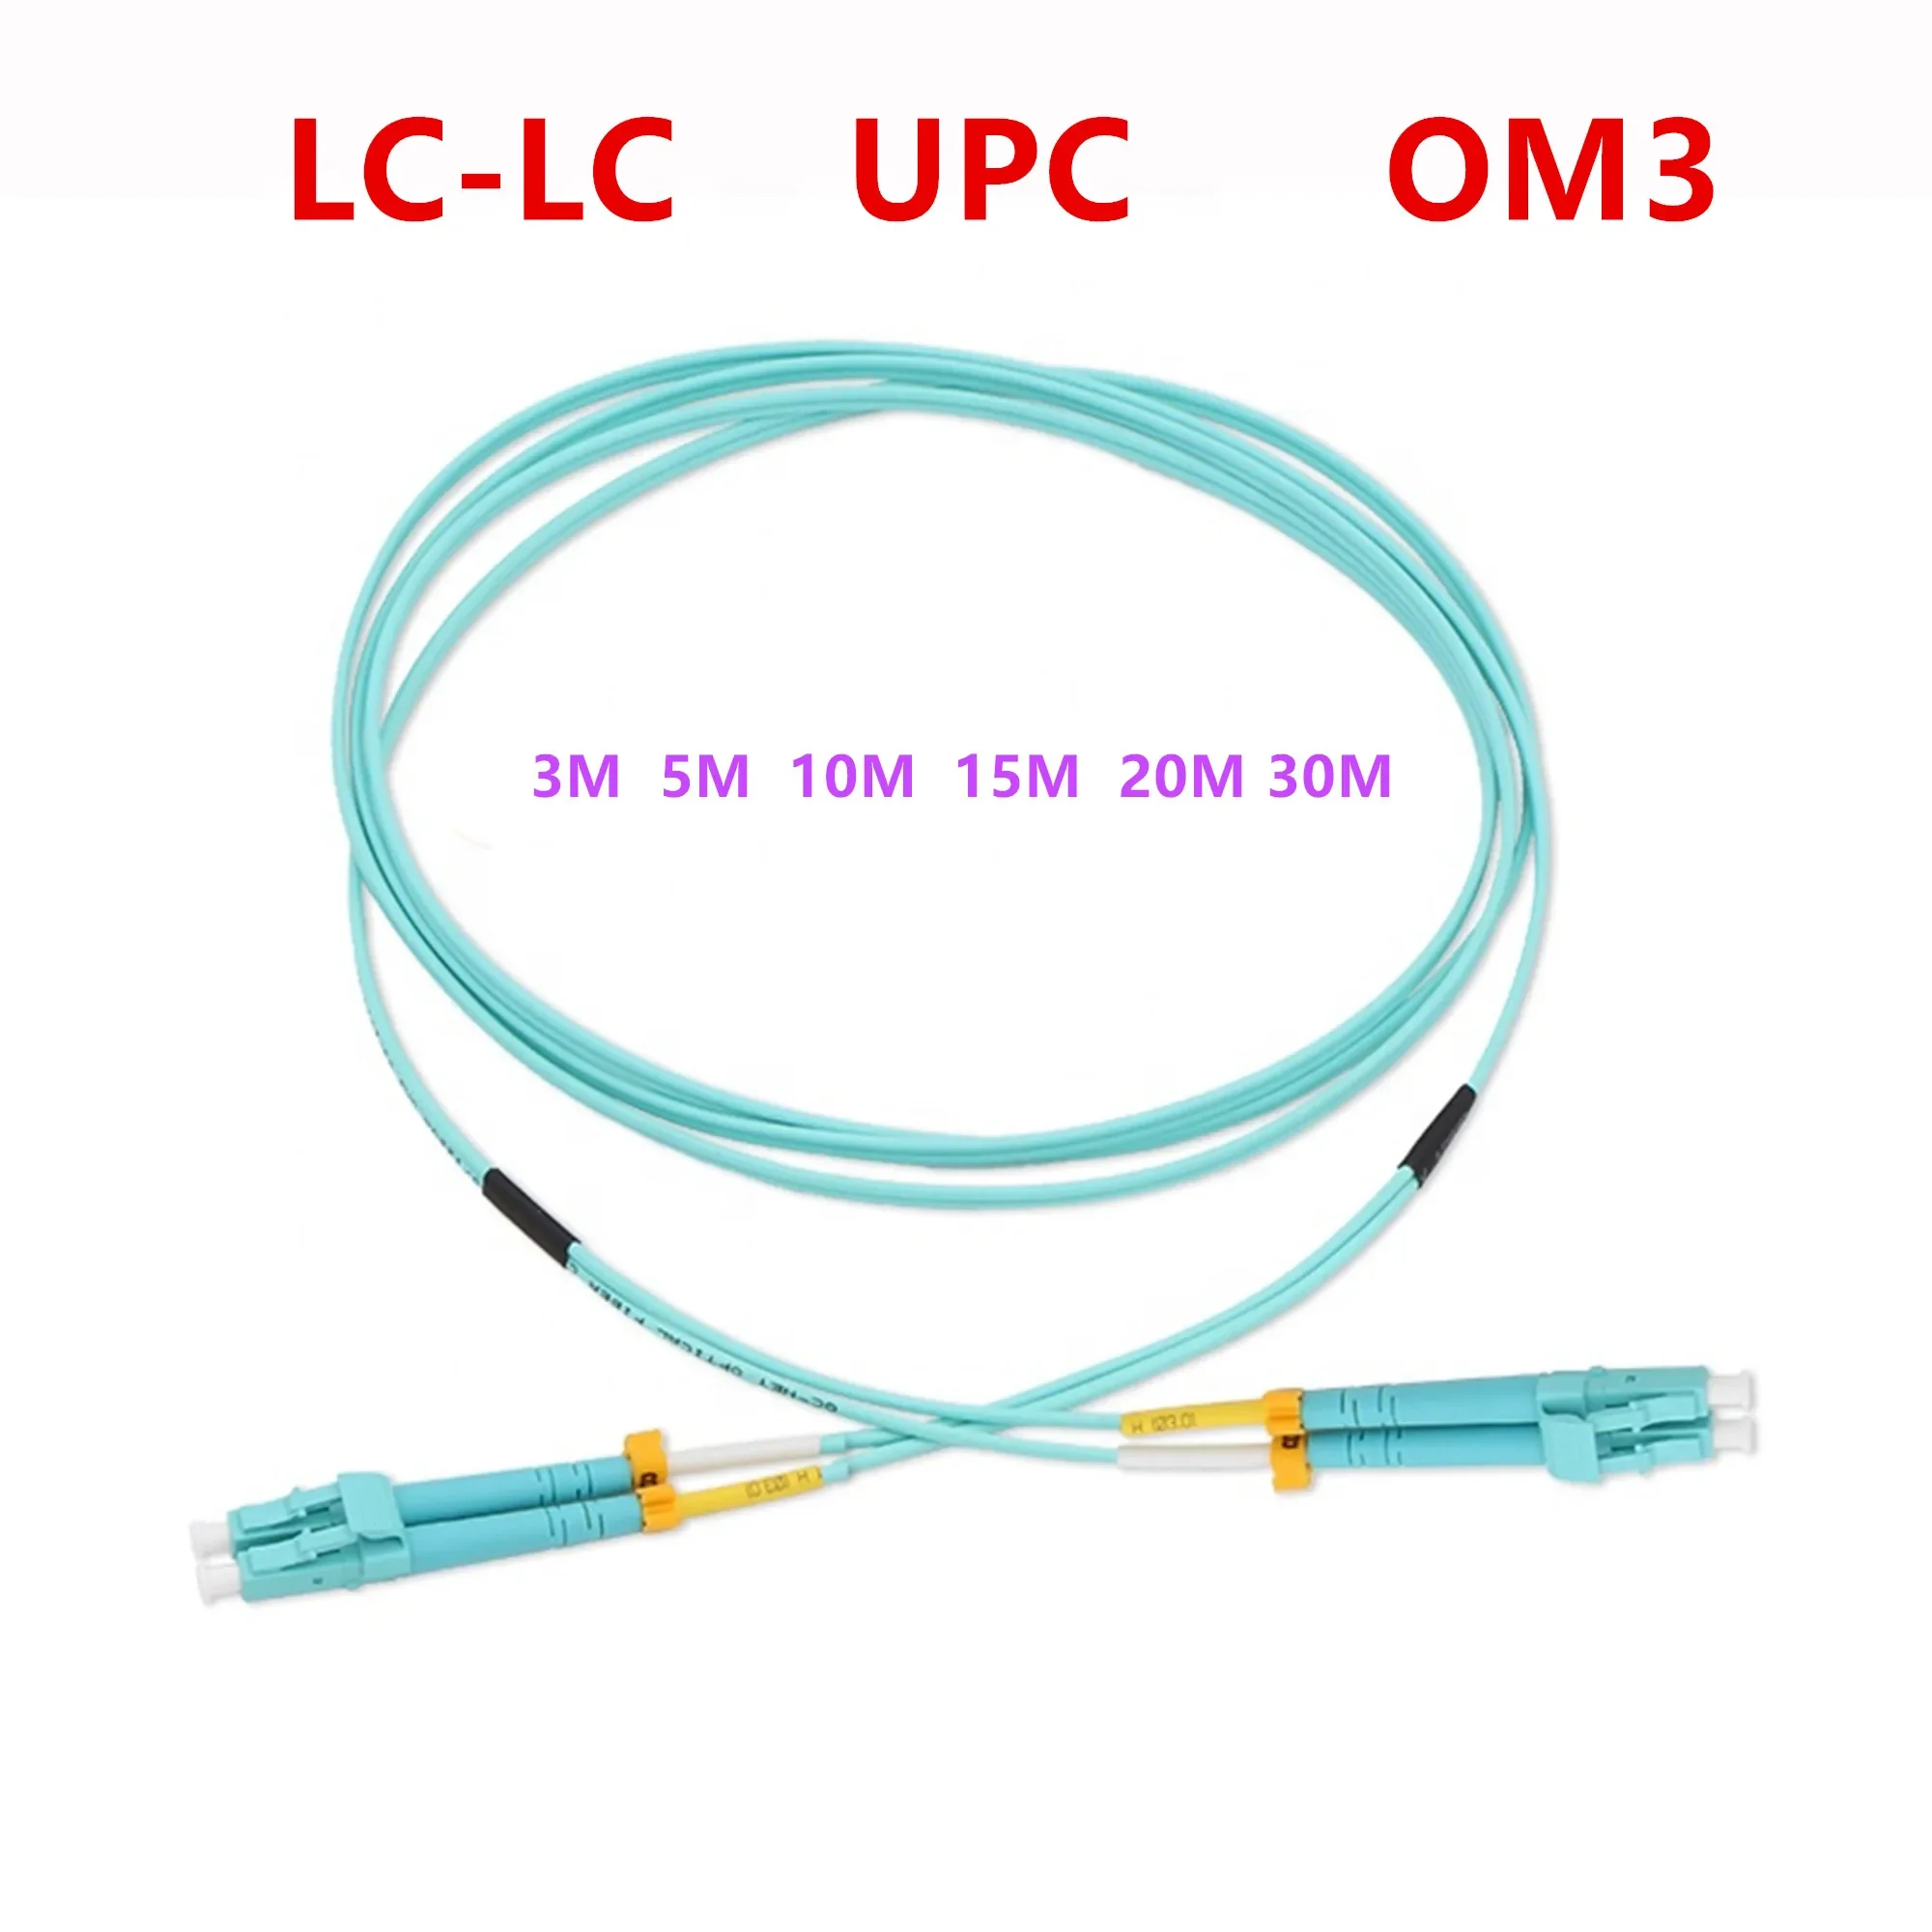 Optical fiber line/LC-LC OM3 UPC Multimode Duplex 2.0mm Fiber Patch Cable LC walkie talkie two way relay delay line duplex repeater interface cable for motorola radio m1225 cm300 gm300 dual relay interface